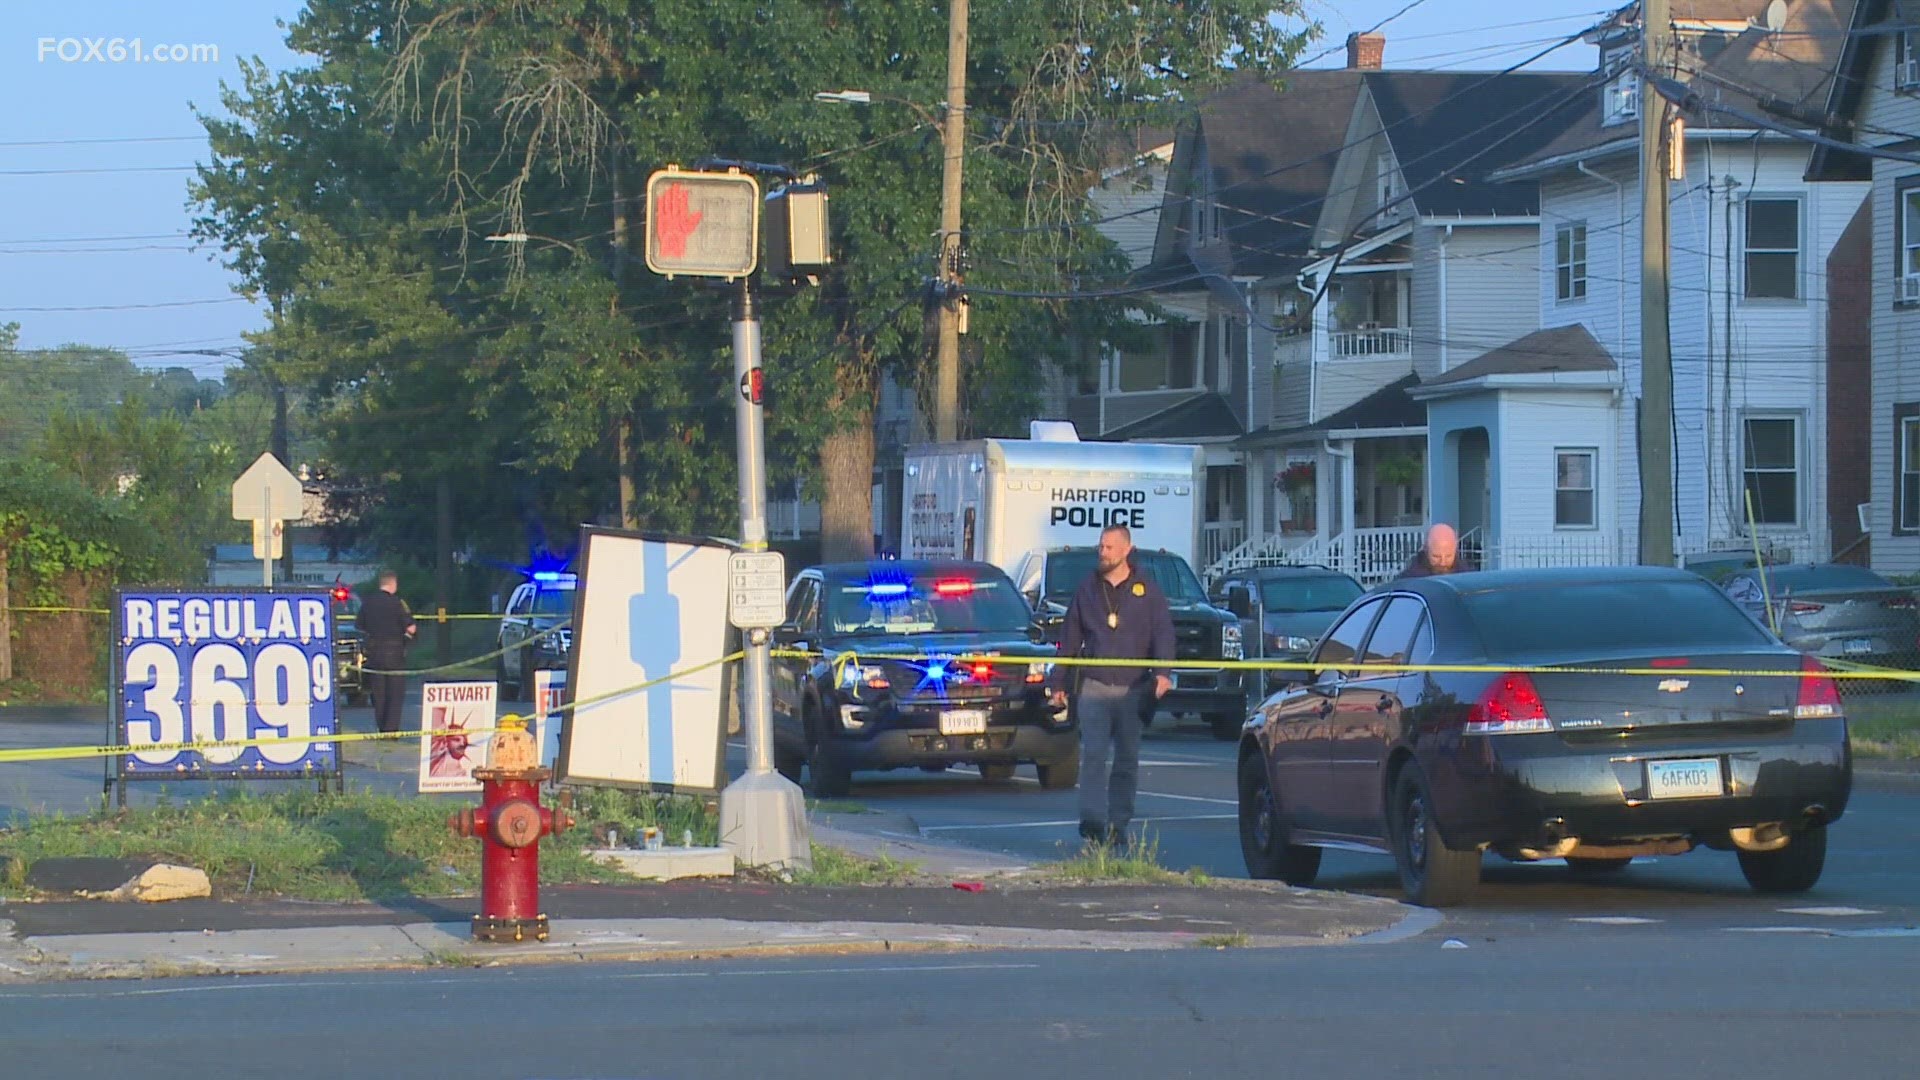 Police in Hartford say three people were killed overnight in two separate shooting incidents.